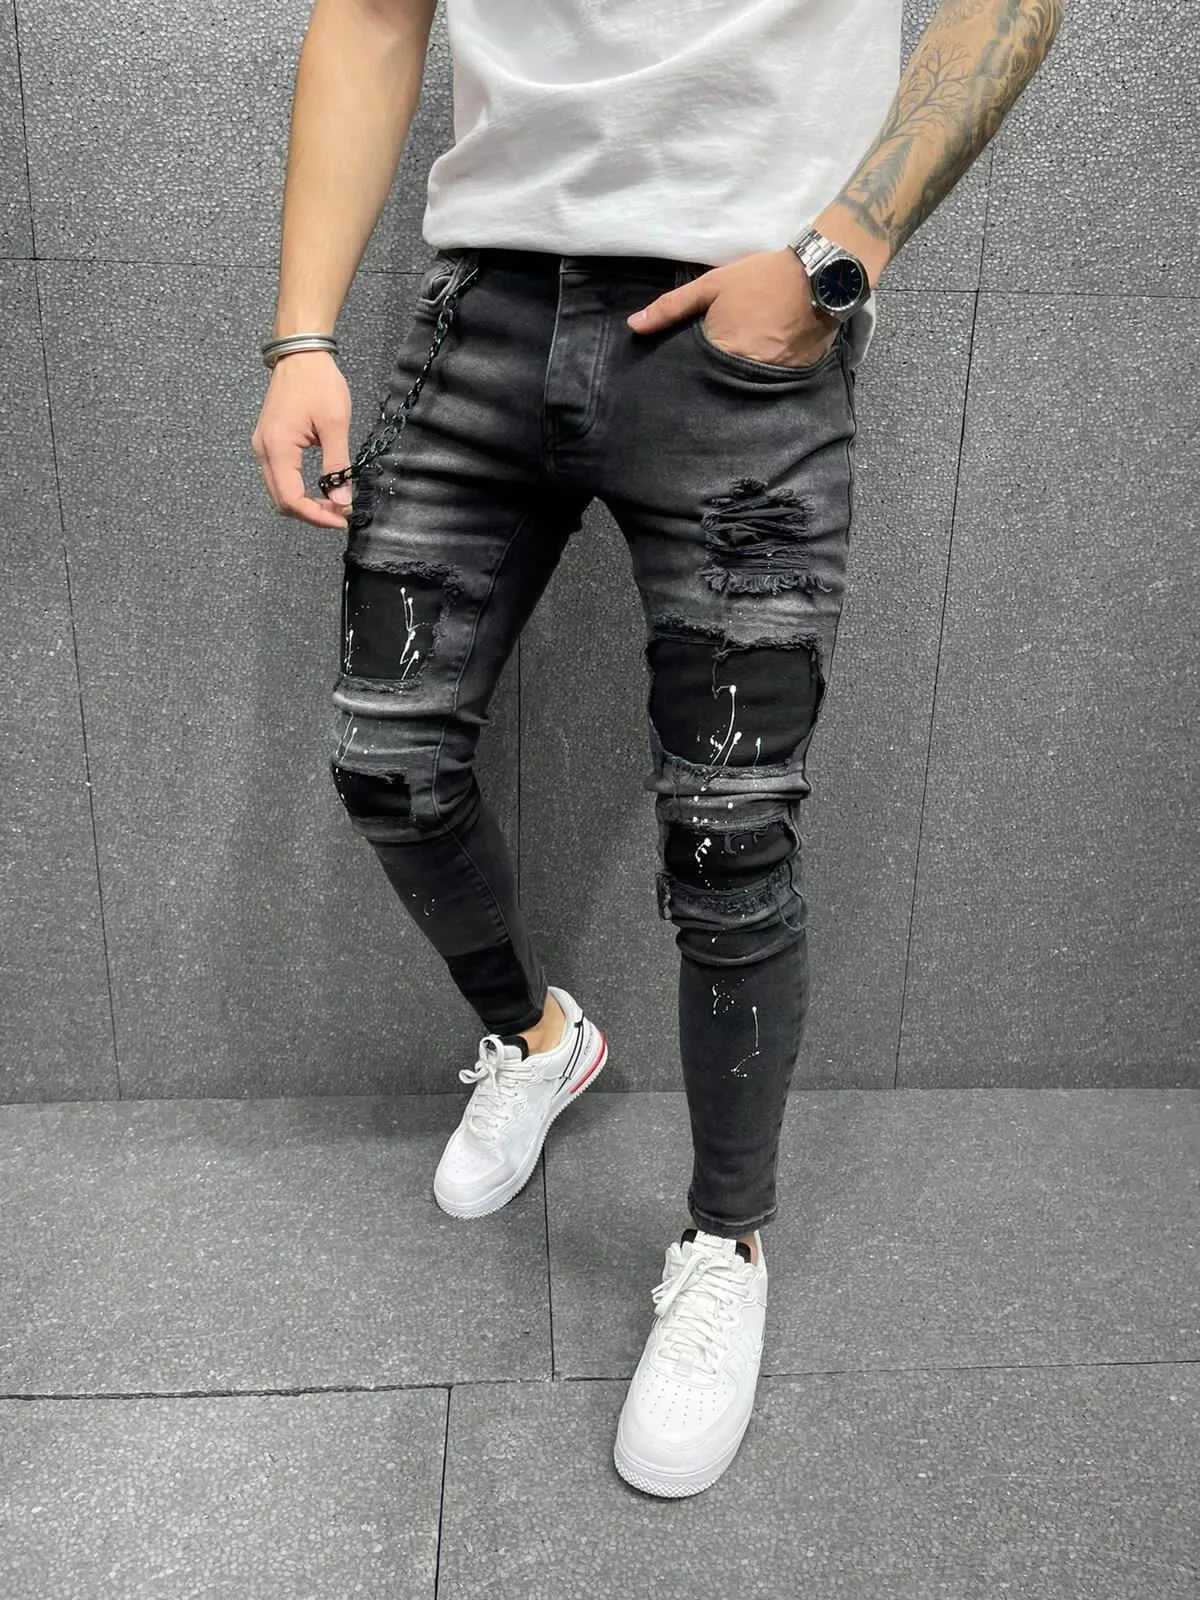 Men Jeans Slim Fit Ripped  Fashion Paint Hip Hop Male Denim Street Style Youth Cool Pant Stretch Denim Hole Patchwork Trousers